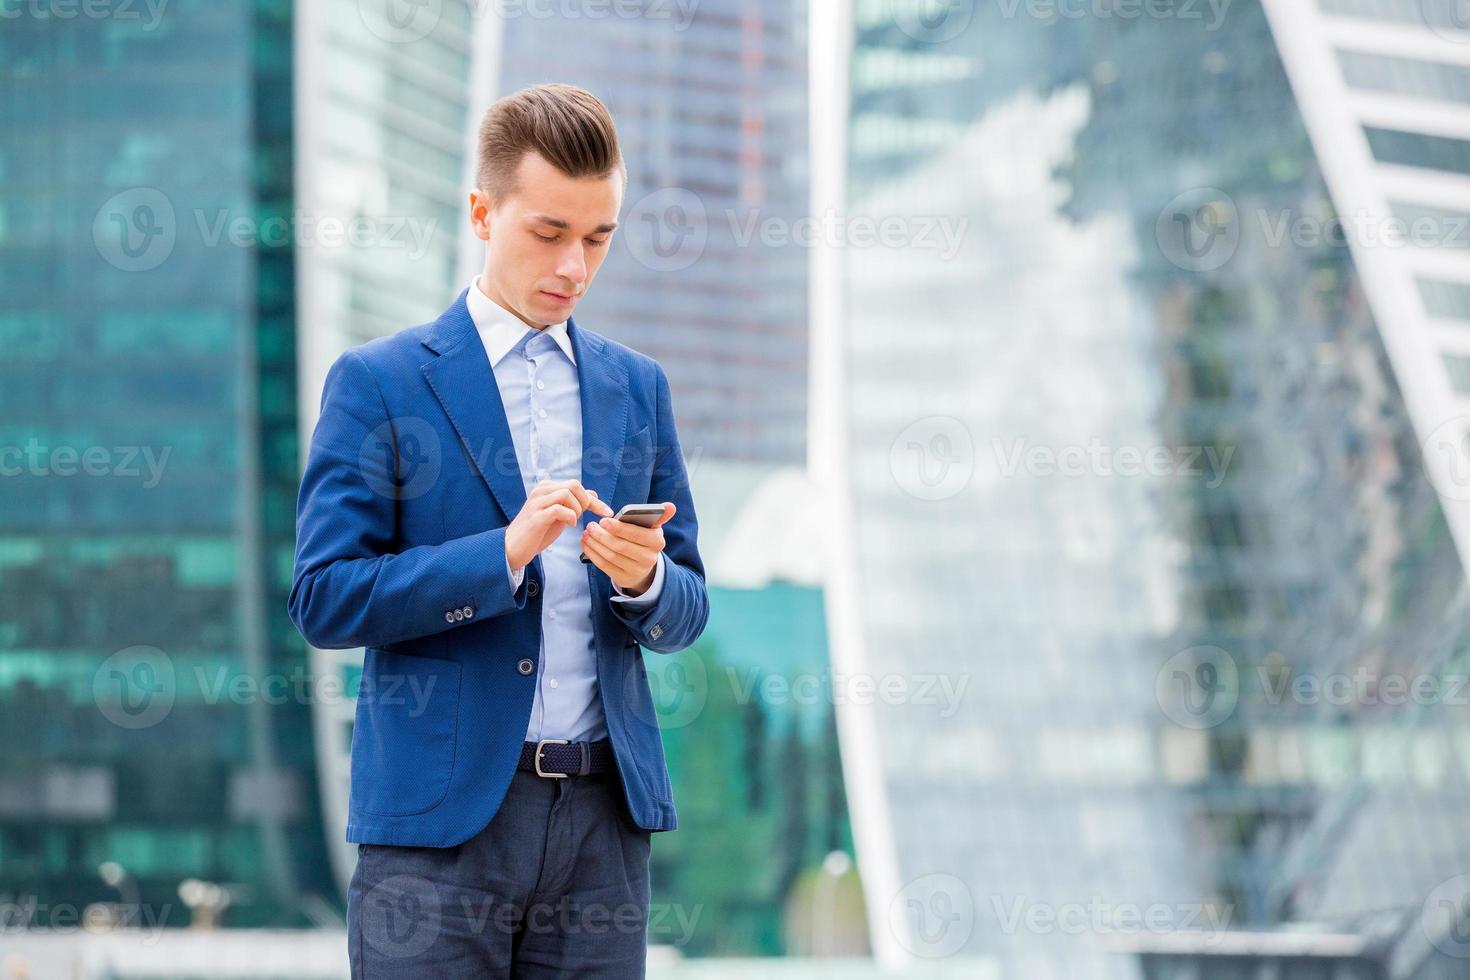 Handsome businessman in suit with smart phone in hand photo